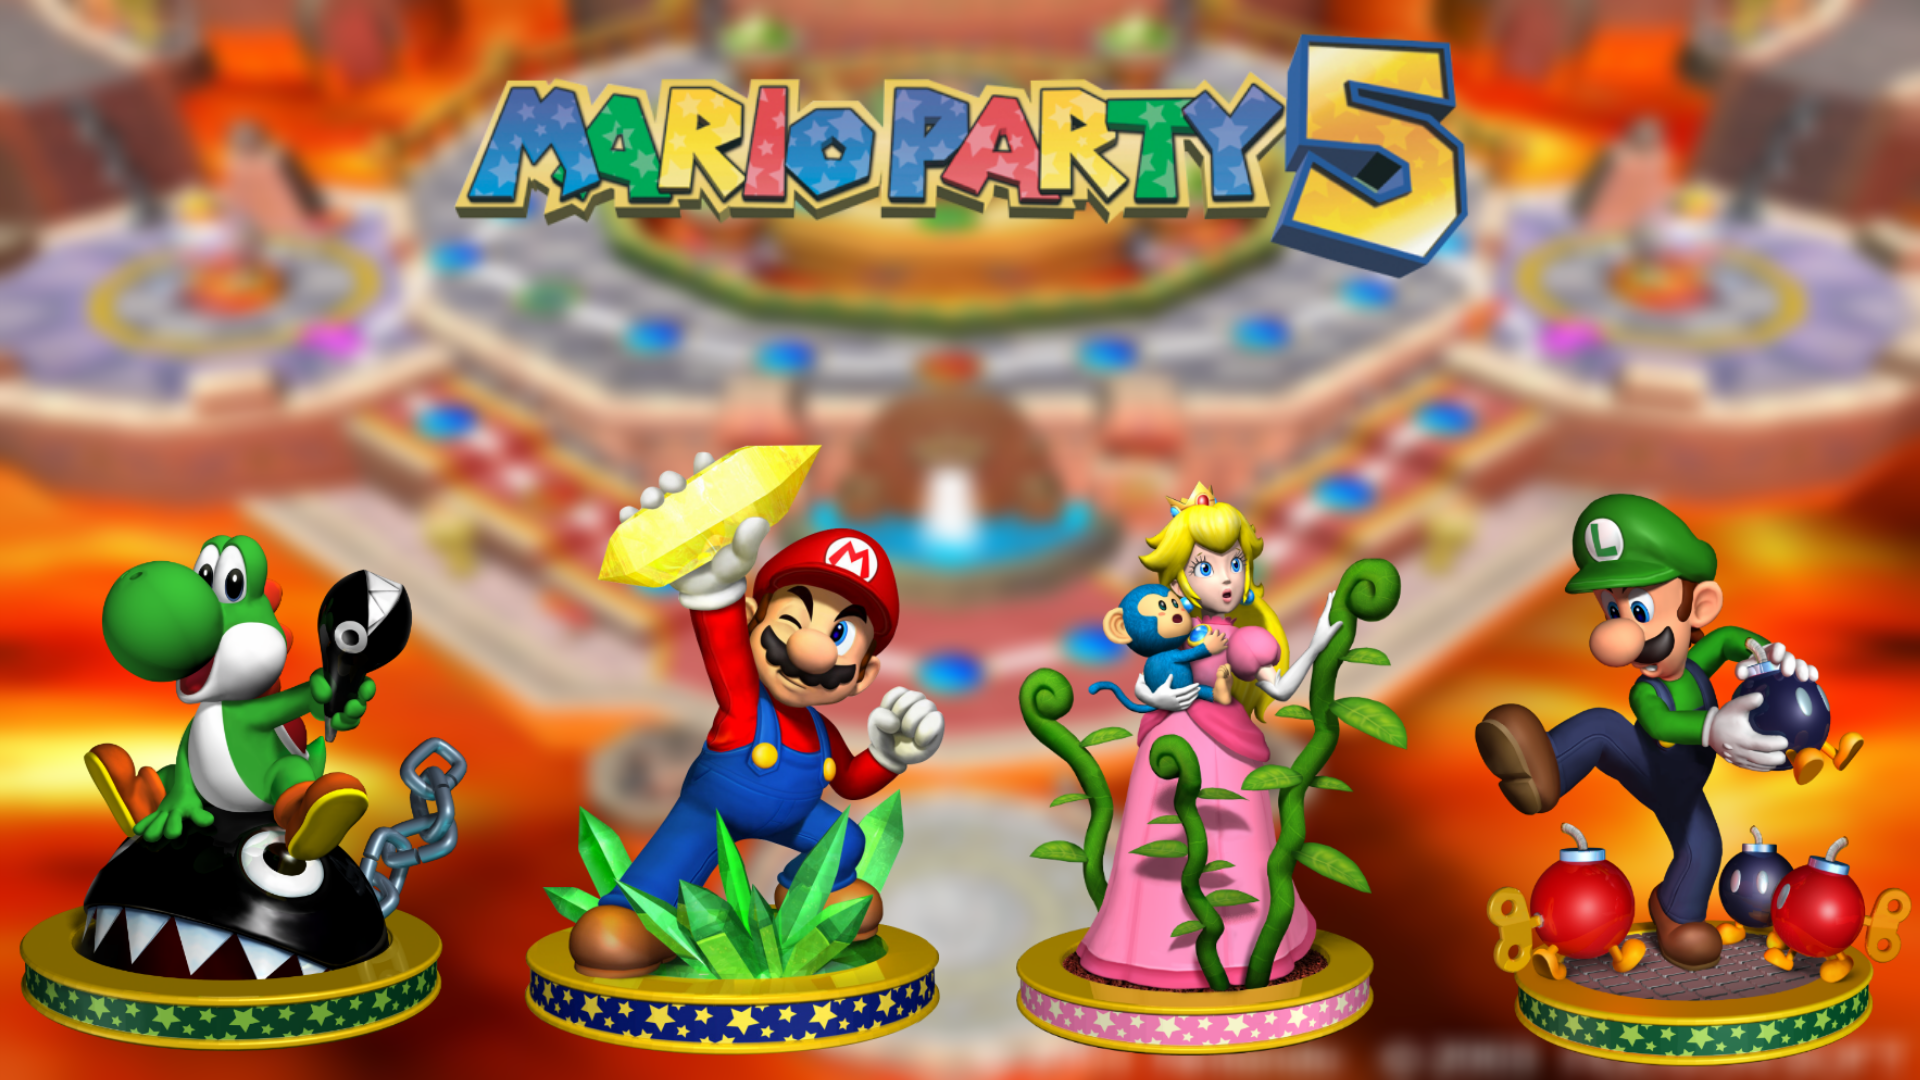 Mario party 5 iso download dolphin